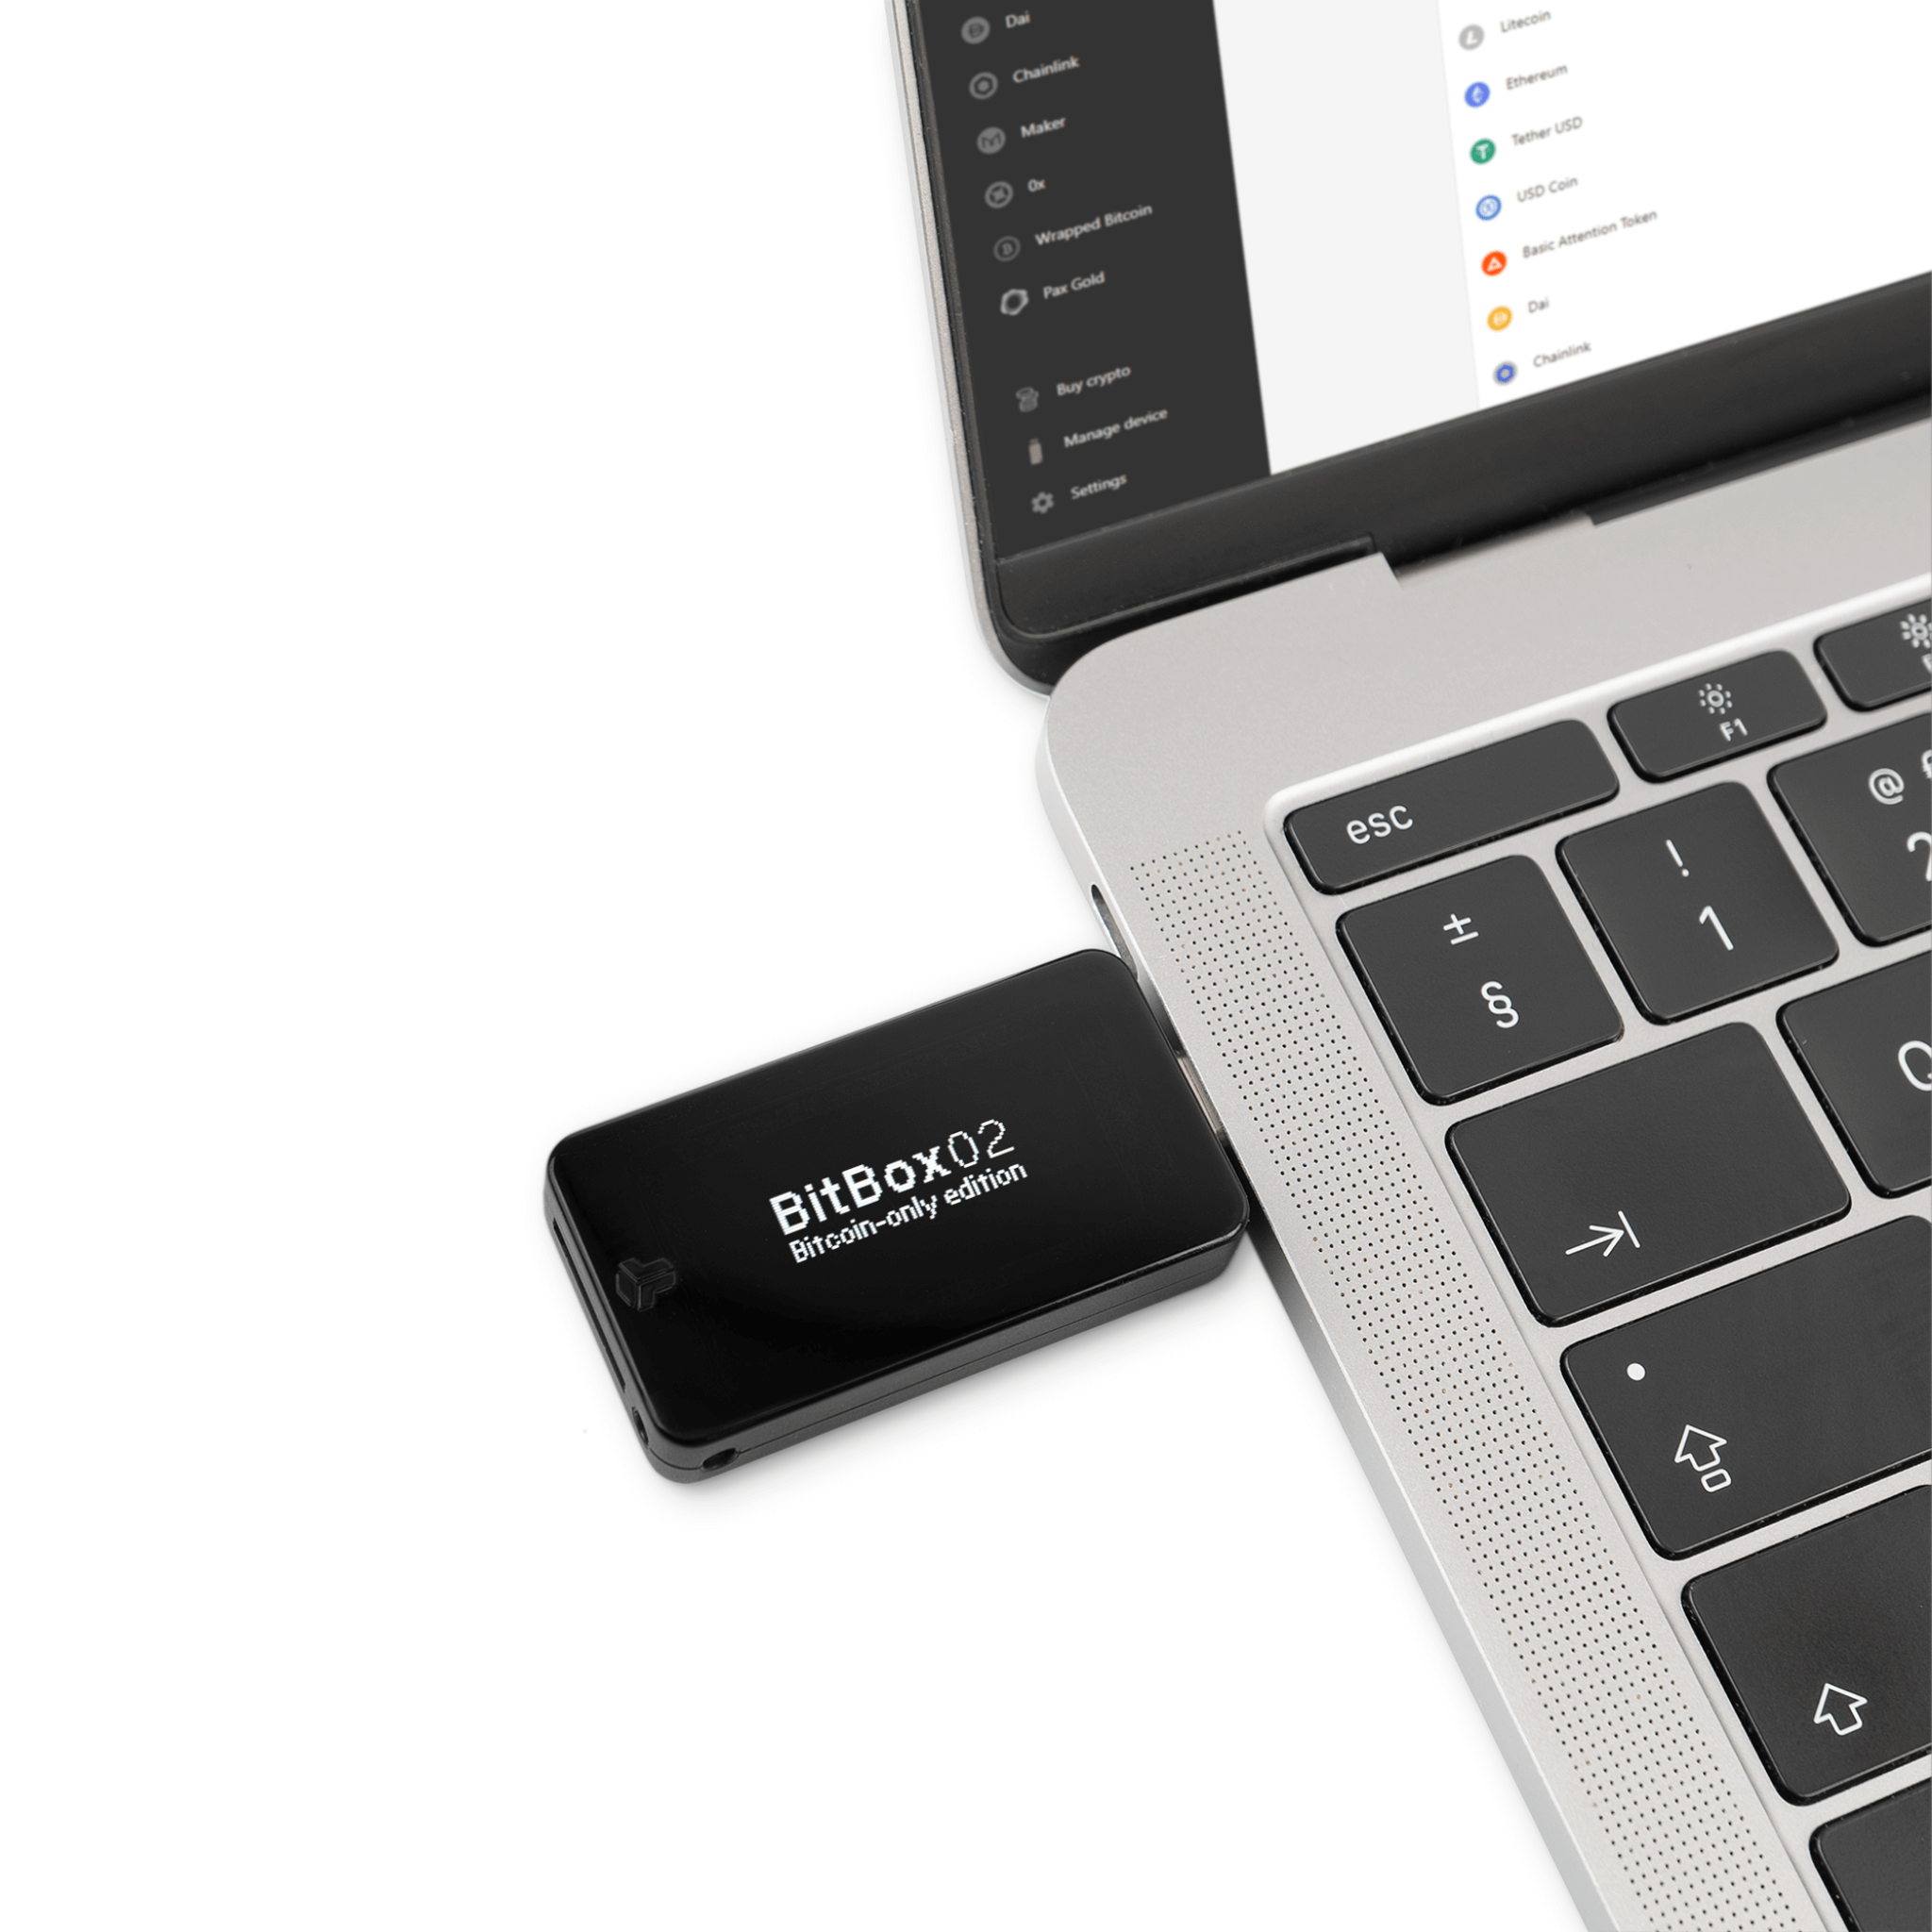 BitBox02 Bitcoin-Only Edition Pack of 3 Cryptocurrency Hardware Wallets Plugged Into Apple Laptop